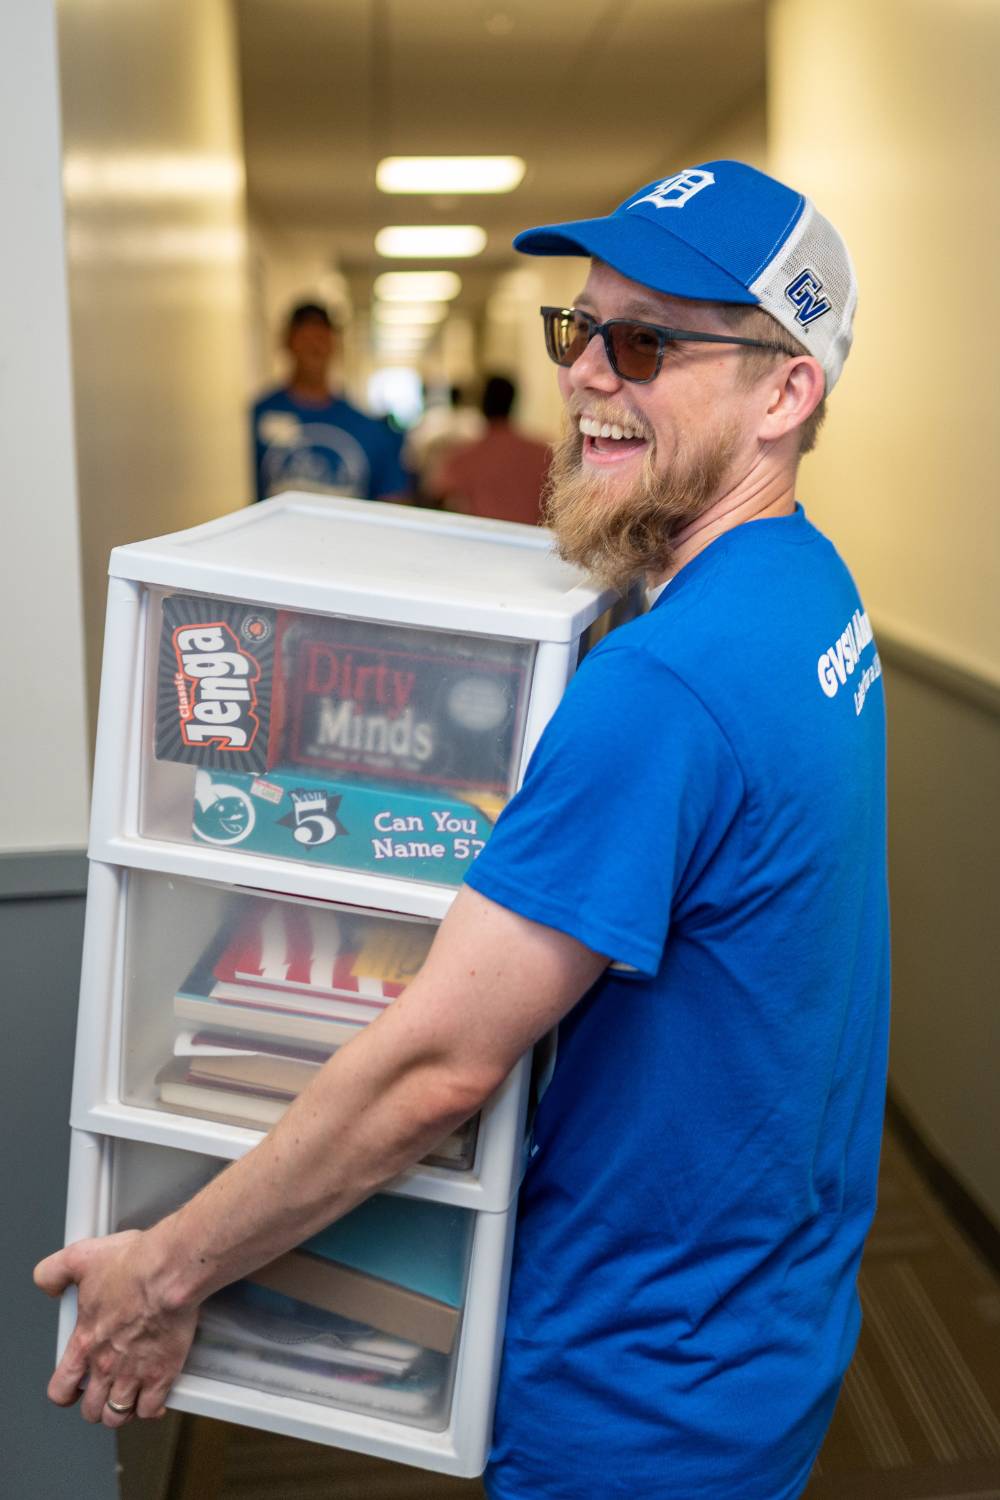 Alumn holding box with books and games